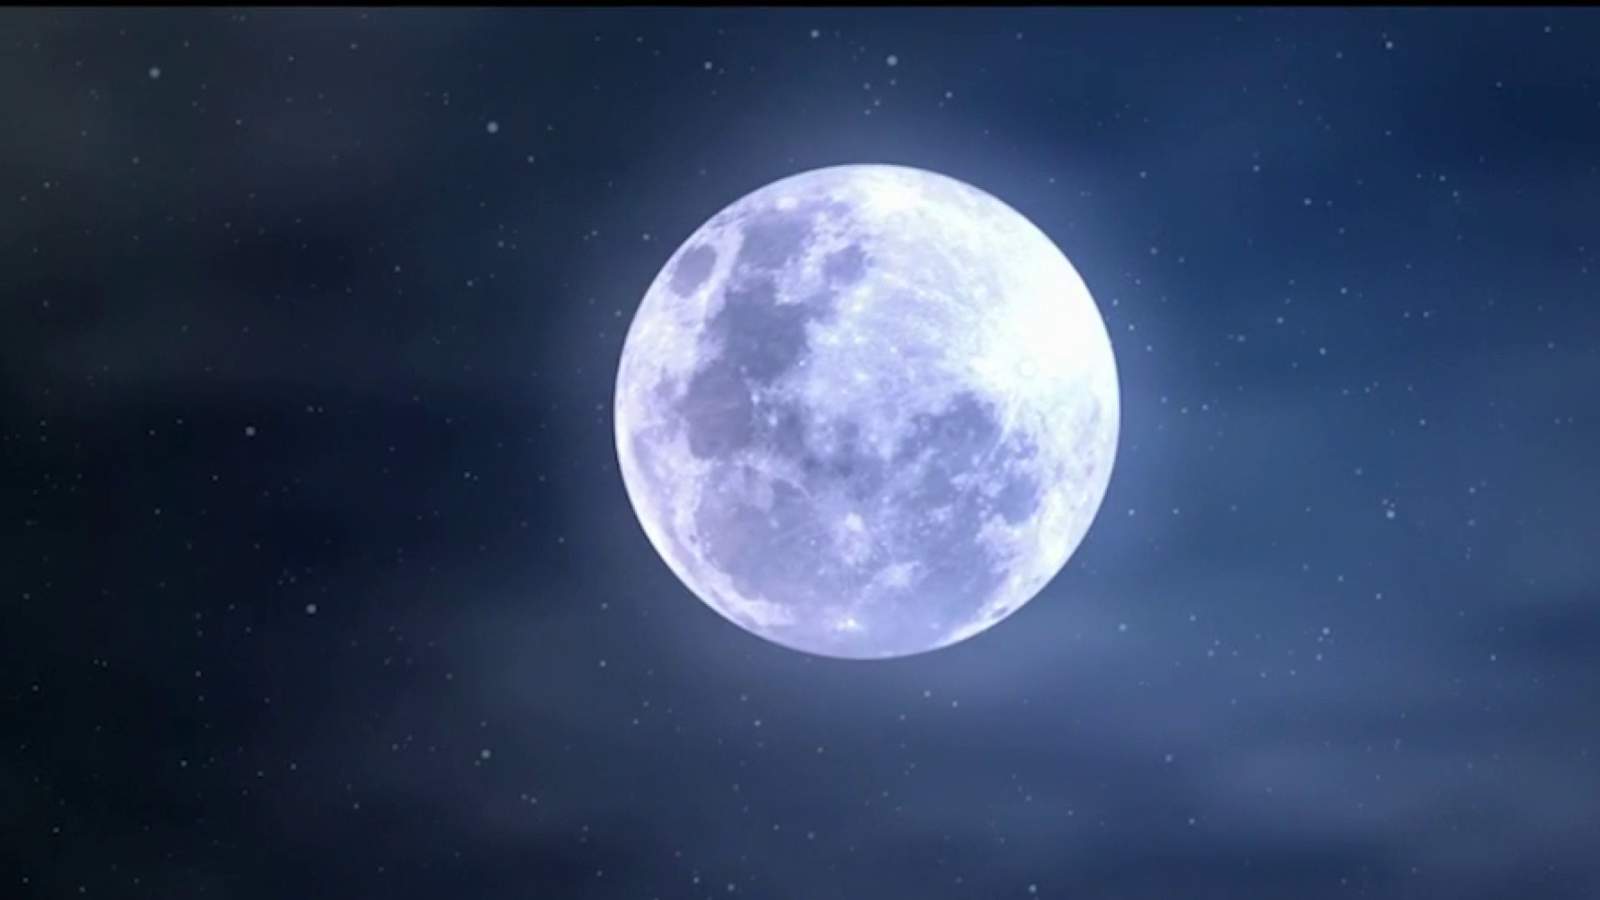 Does a ‘blue moon’ actually exist?